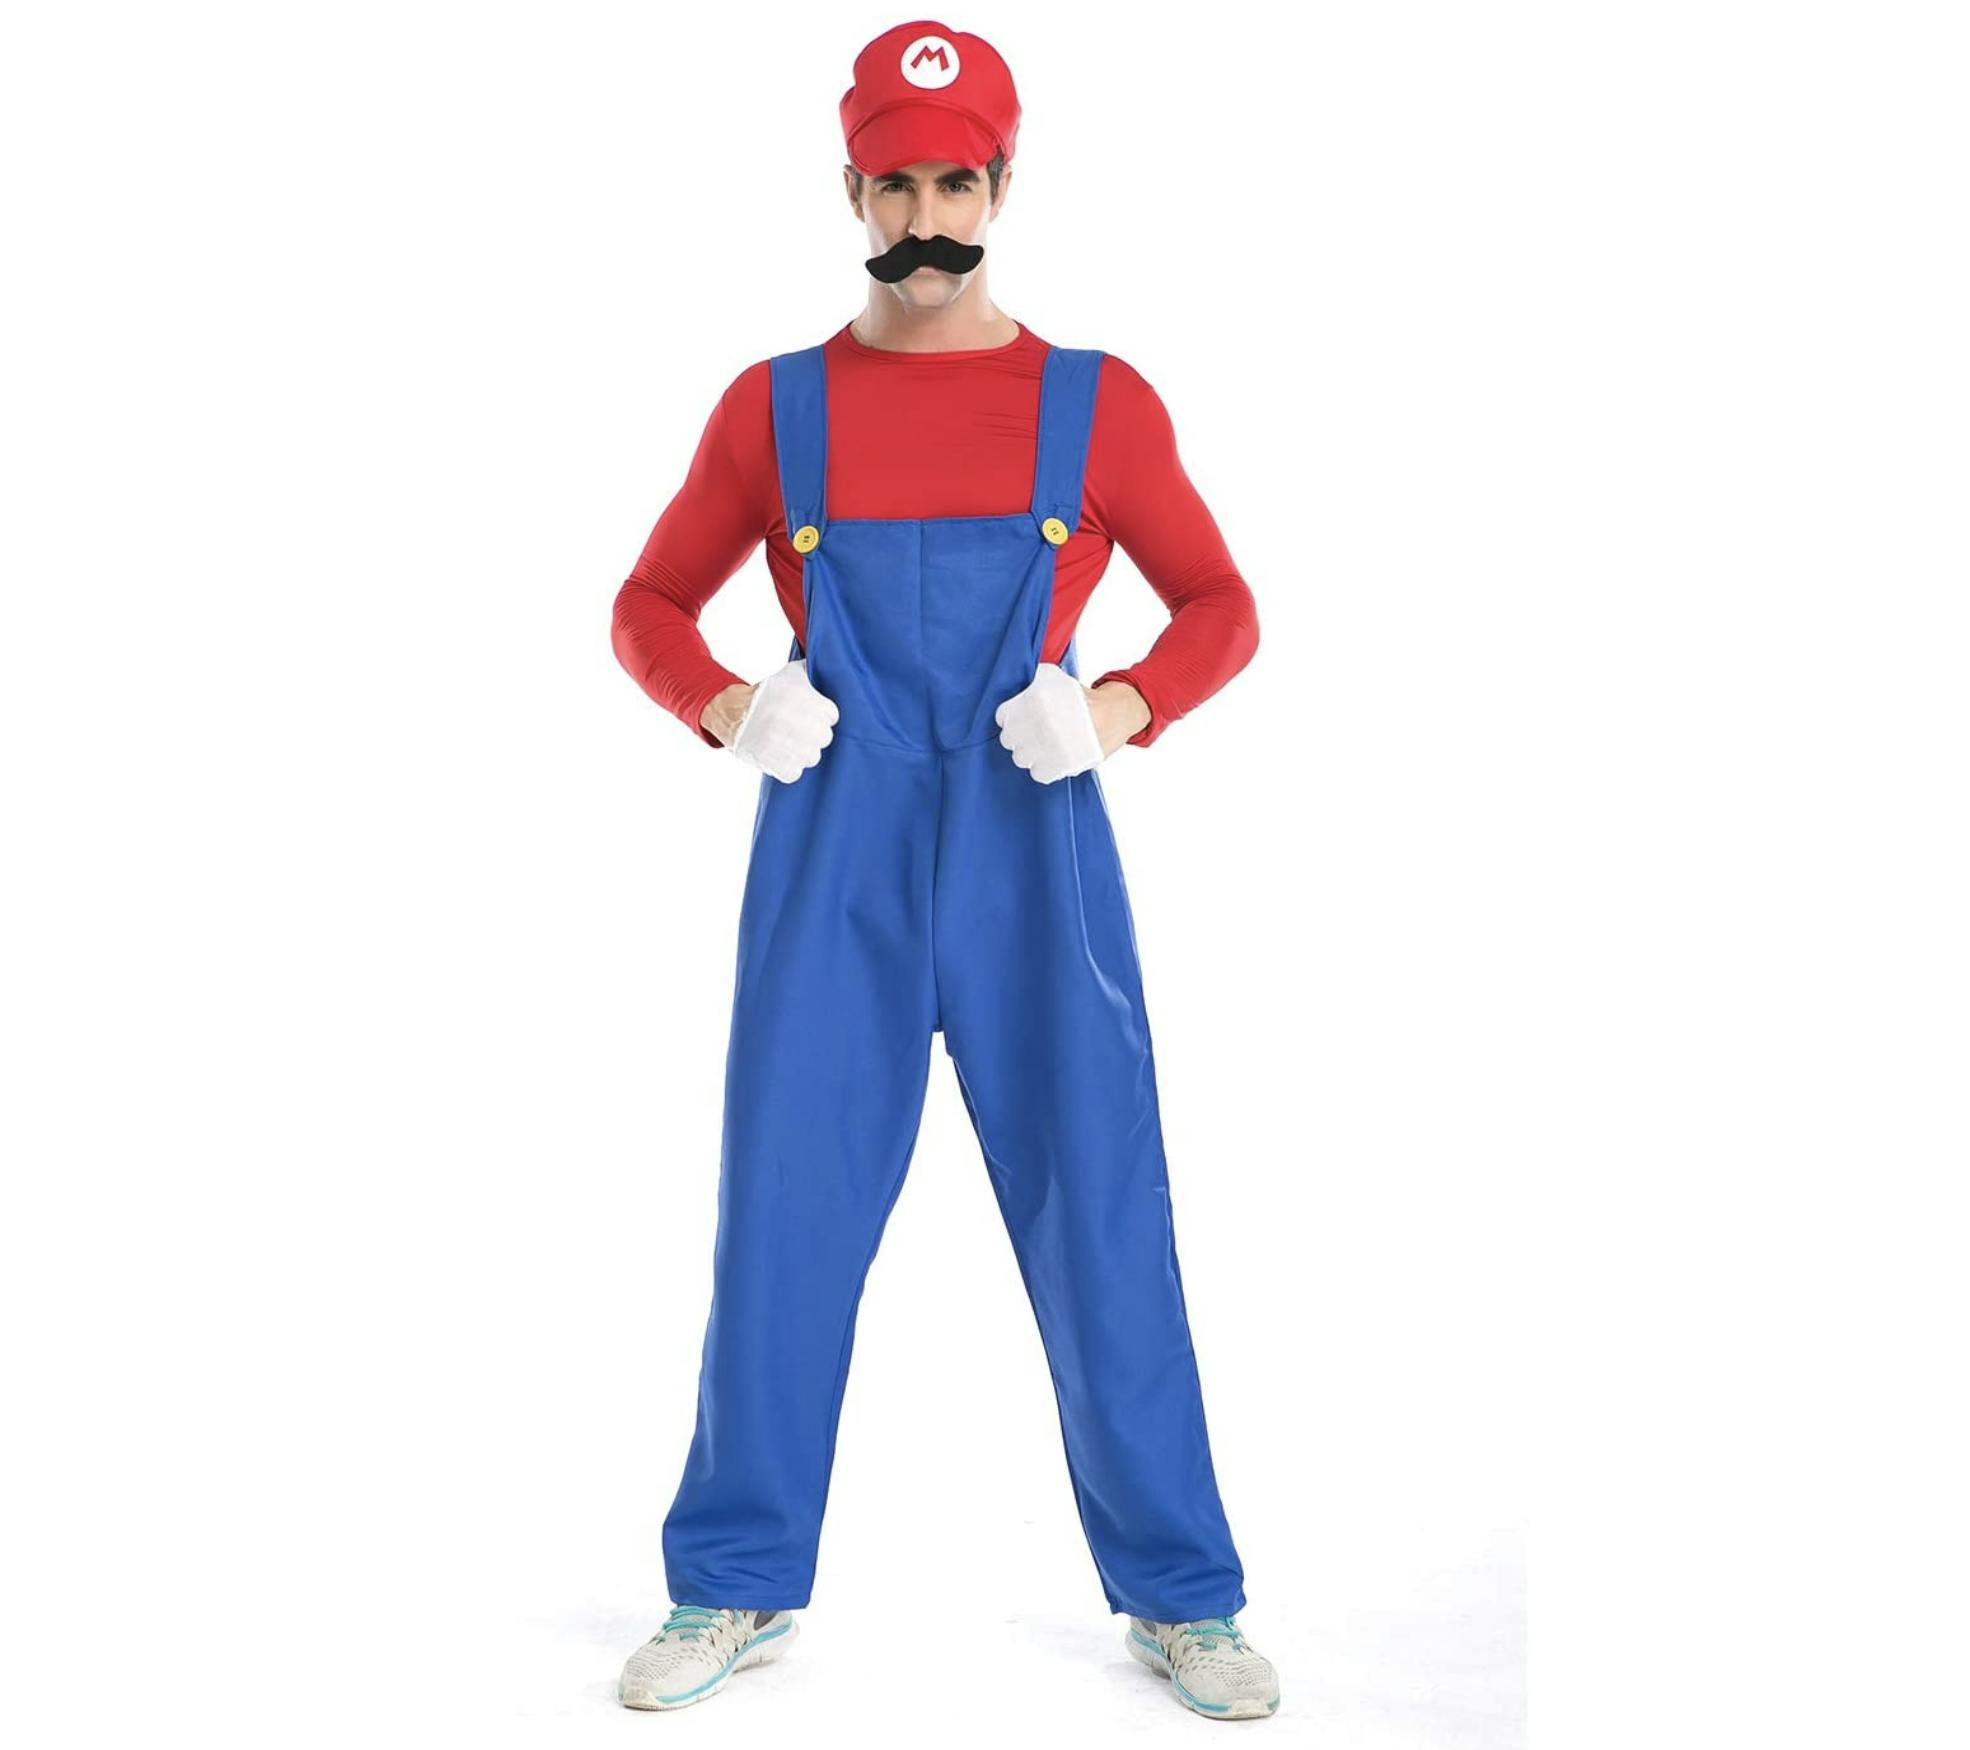 Group Halloween costumes - Super Mario costume, a man in blue overalls, with a red shirt, puffy gloves, a red hat with a M on it, and puffy gloves. There is a moustache on his face.